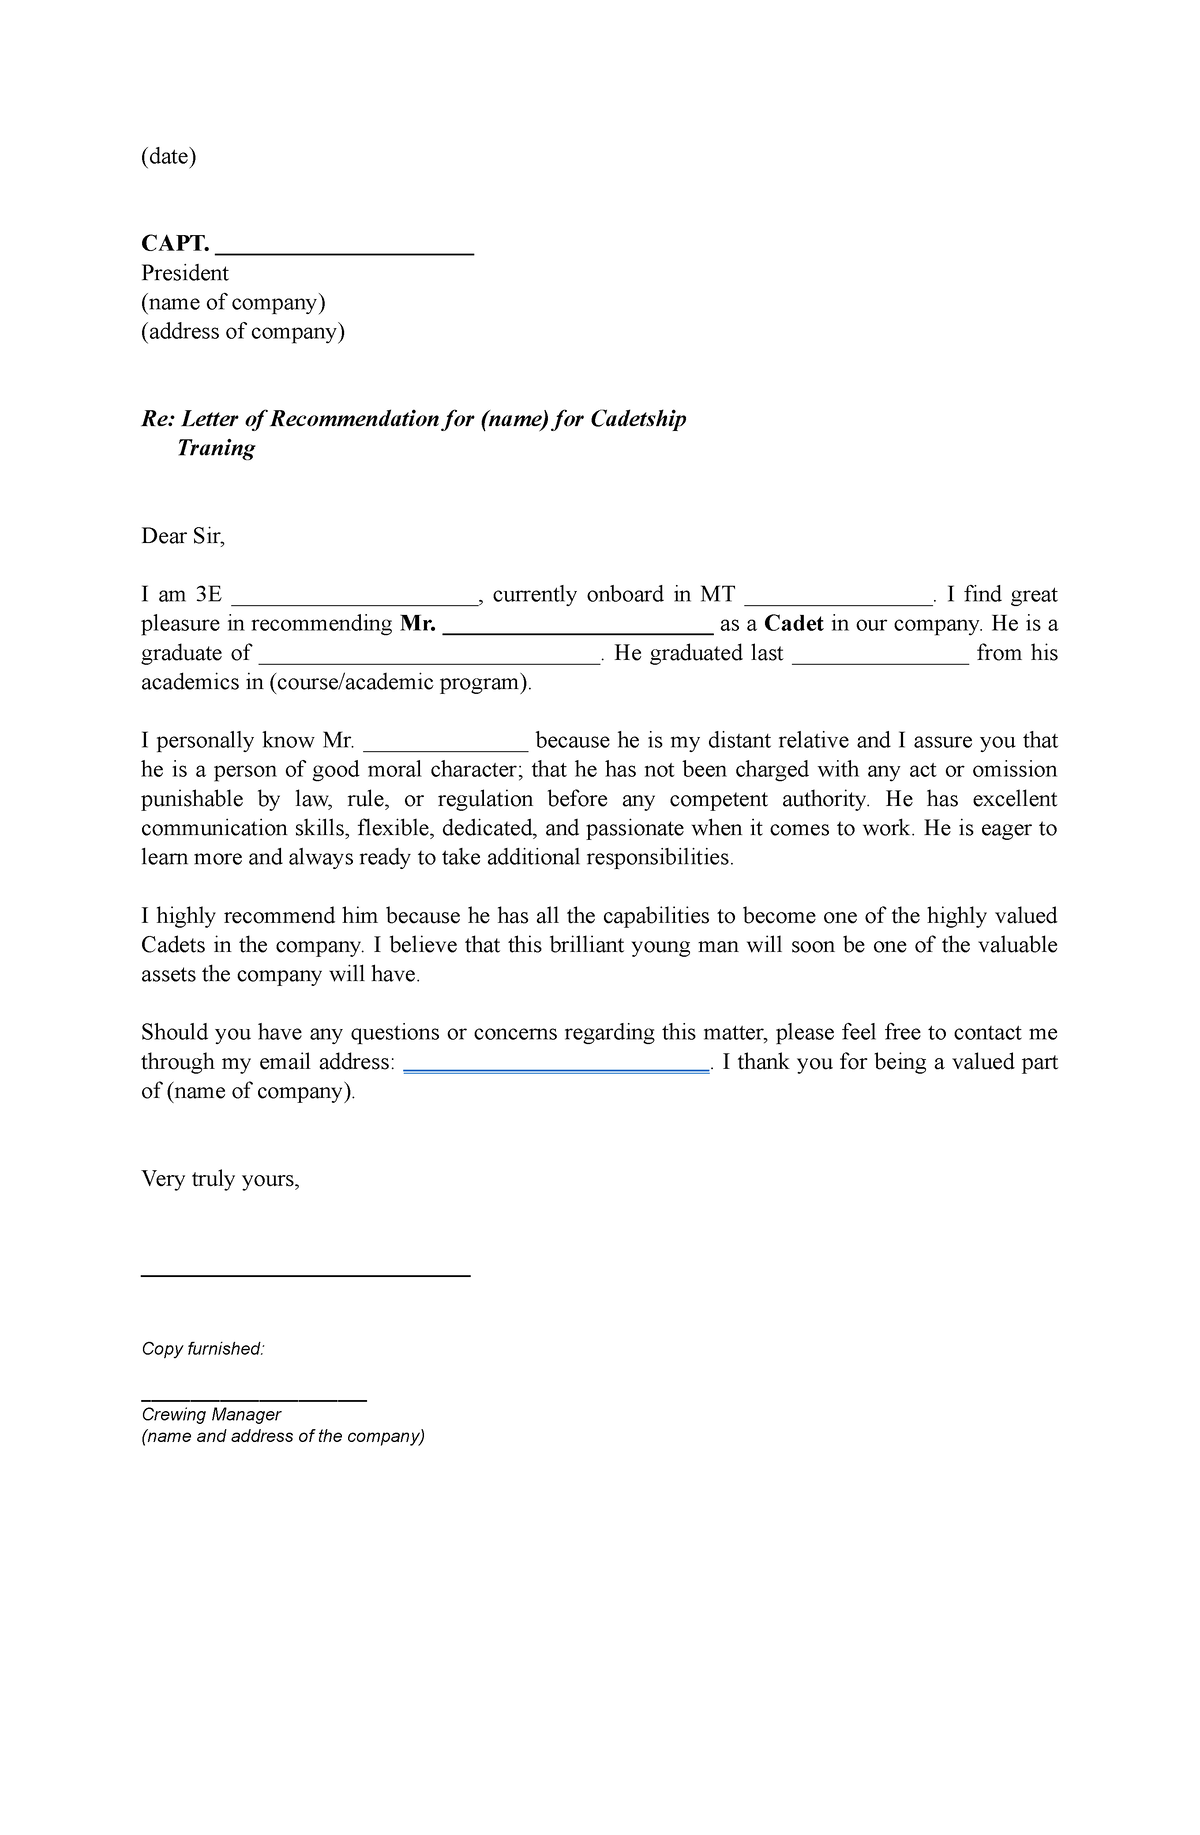 Letter of Recommendation - (date) CAPT ...